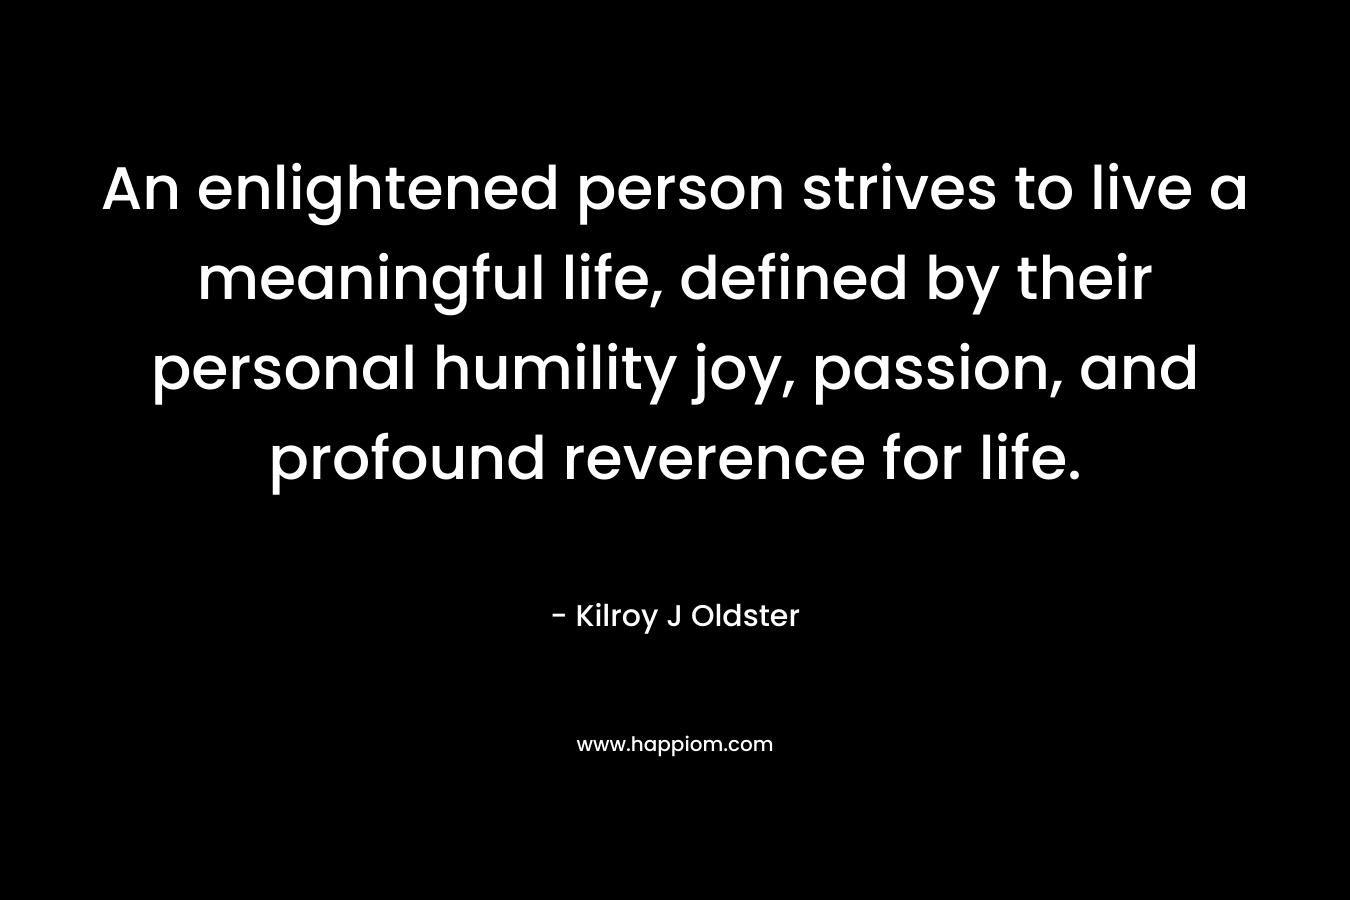 An enlightened person strives to live a meaningful life, defined by their personal humility joy, passion, and profound reverence for life.